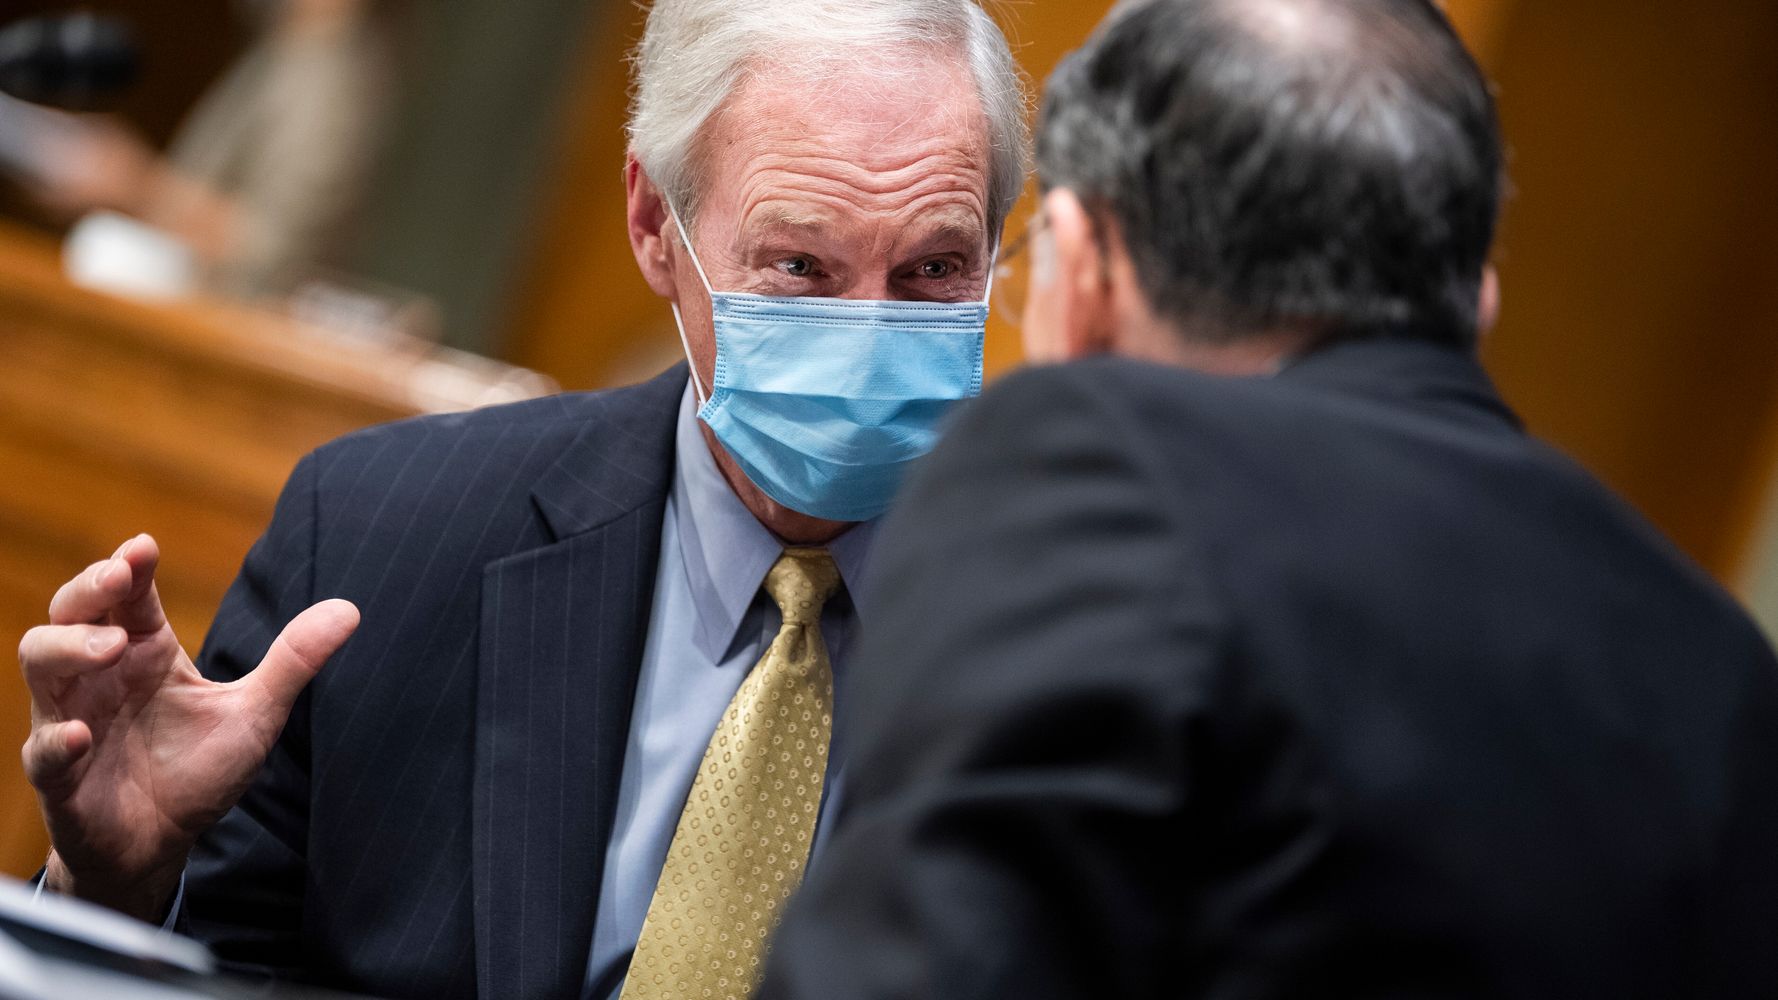 Sen. Ron Johnson Cites Commonly Misused Data To Suggest Vaccines Linked To Deaths